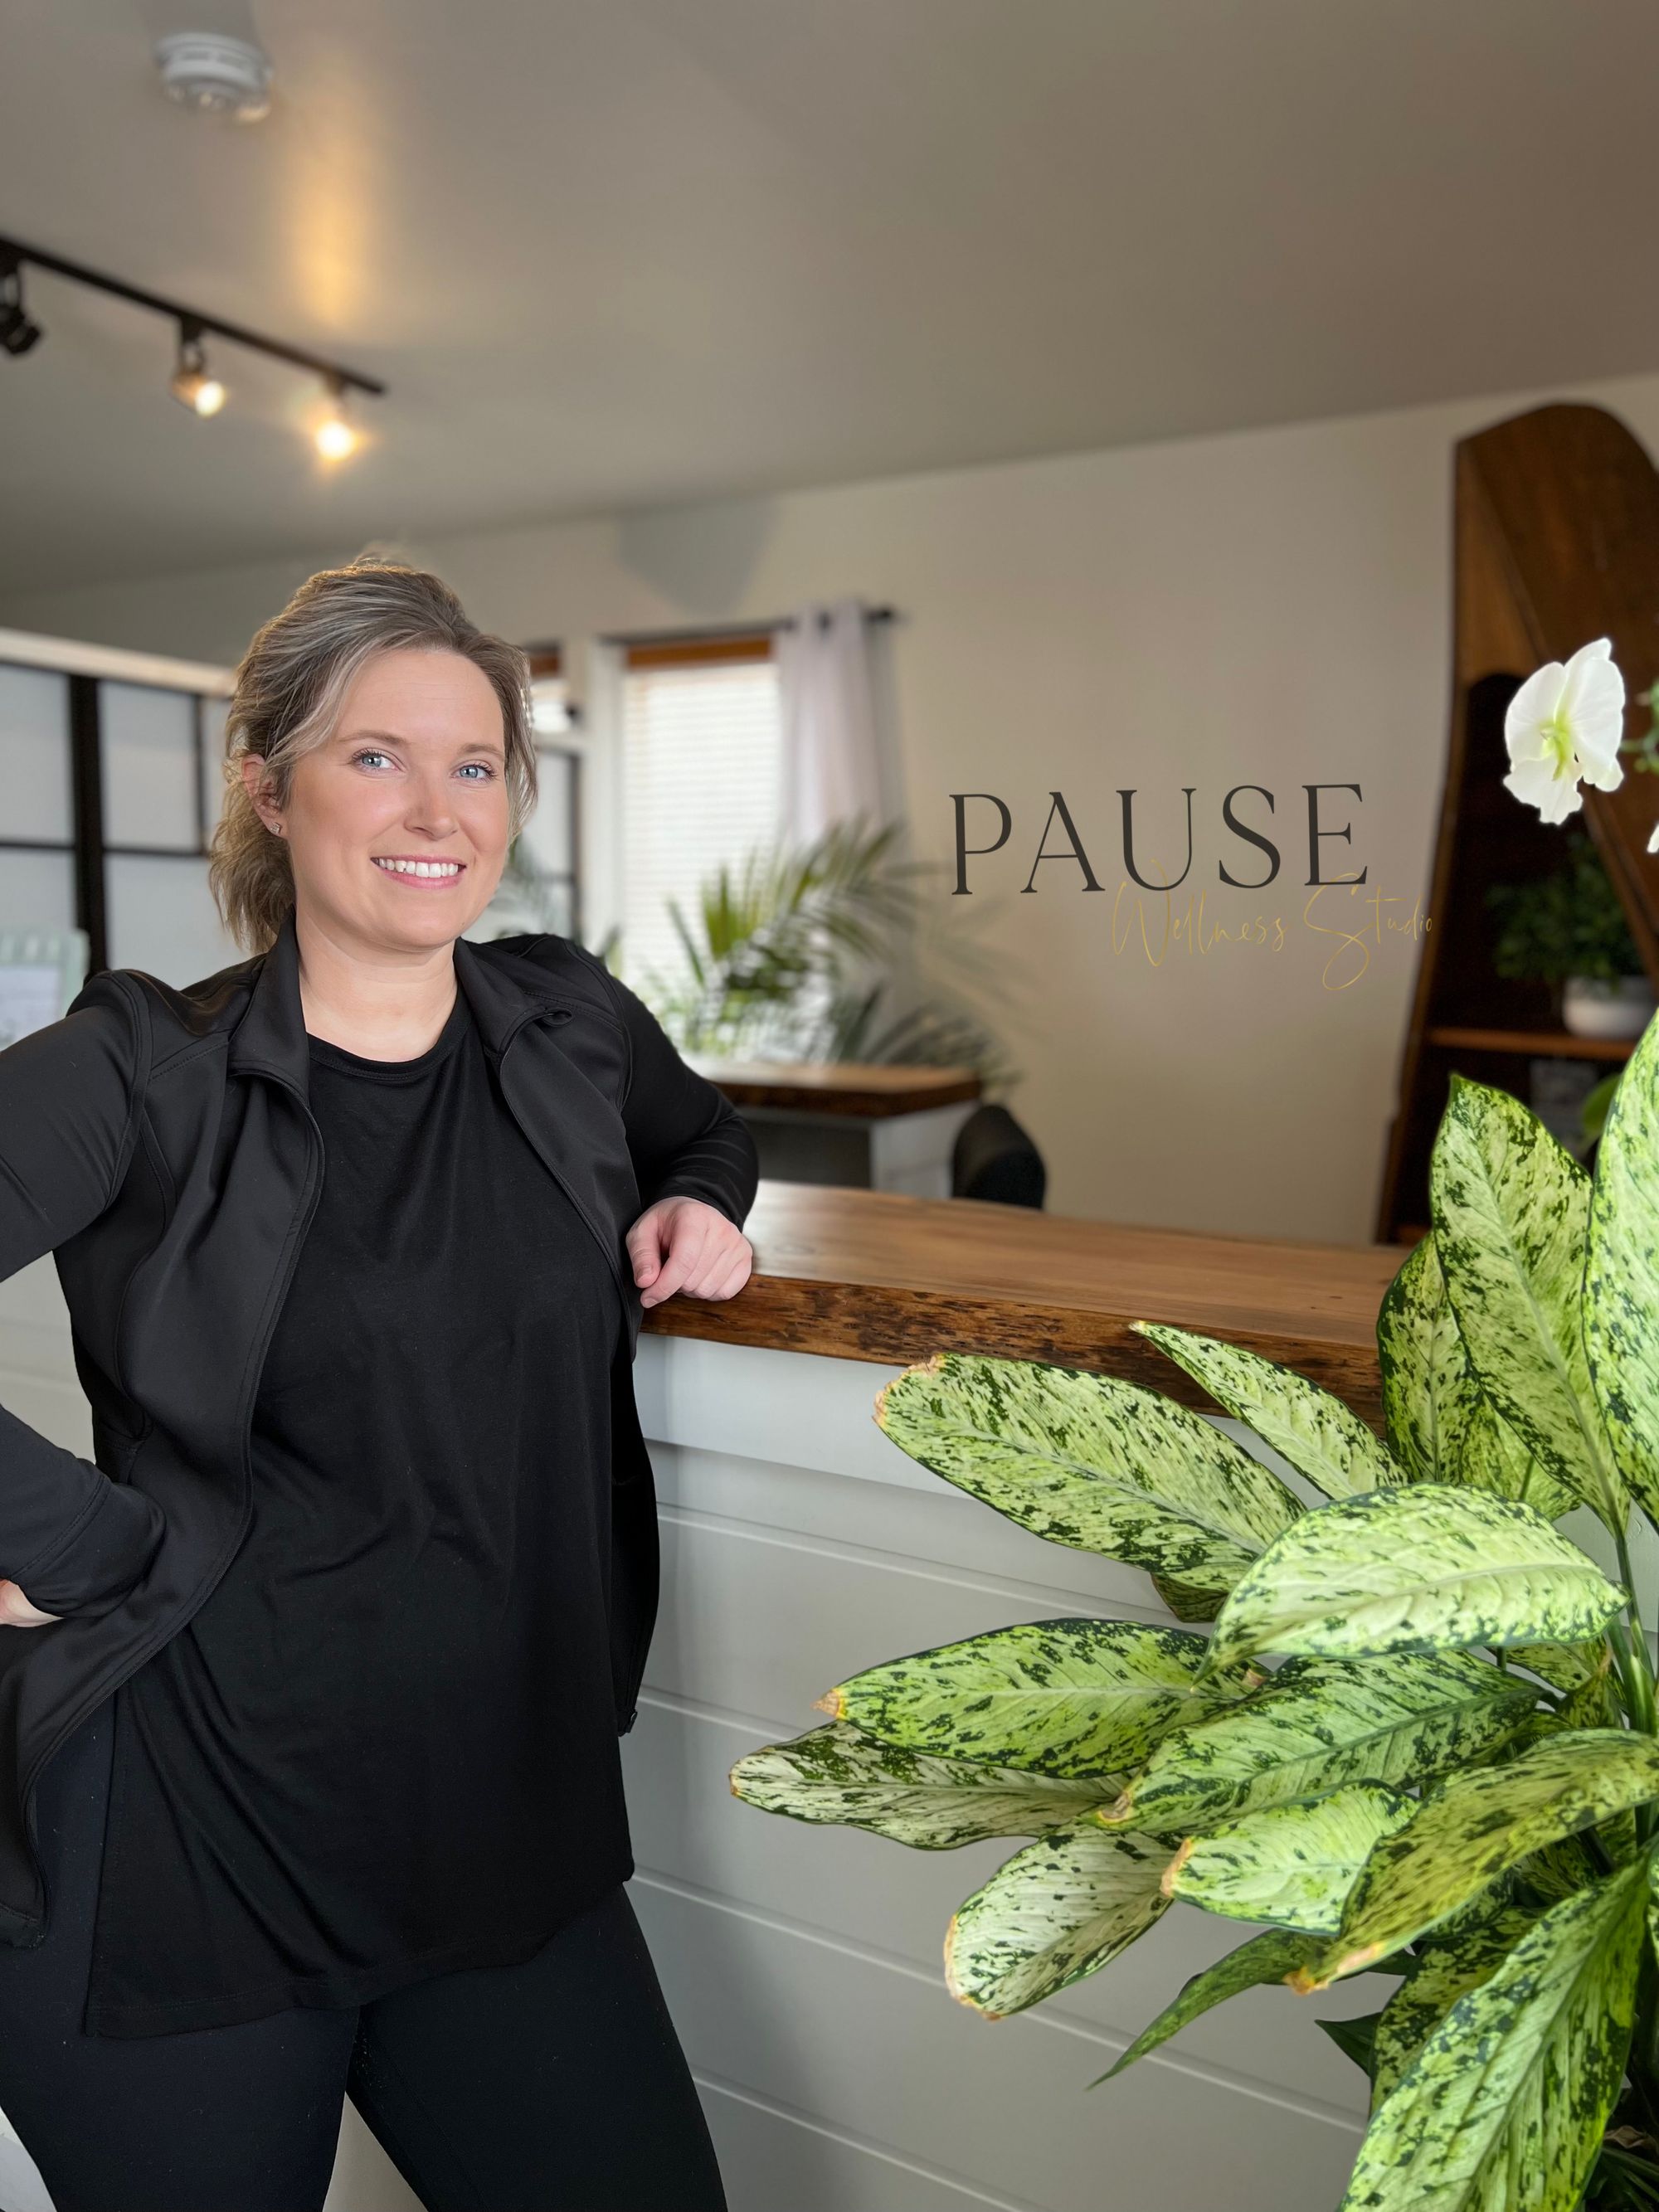 Healthy Life Can Start With a Pause - Pause Wellness Studio